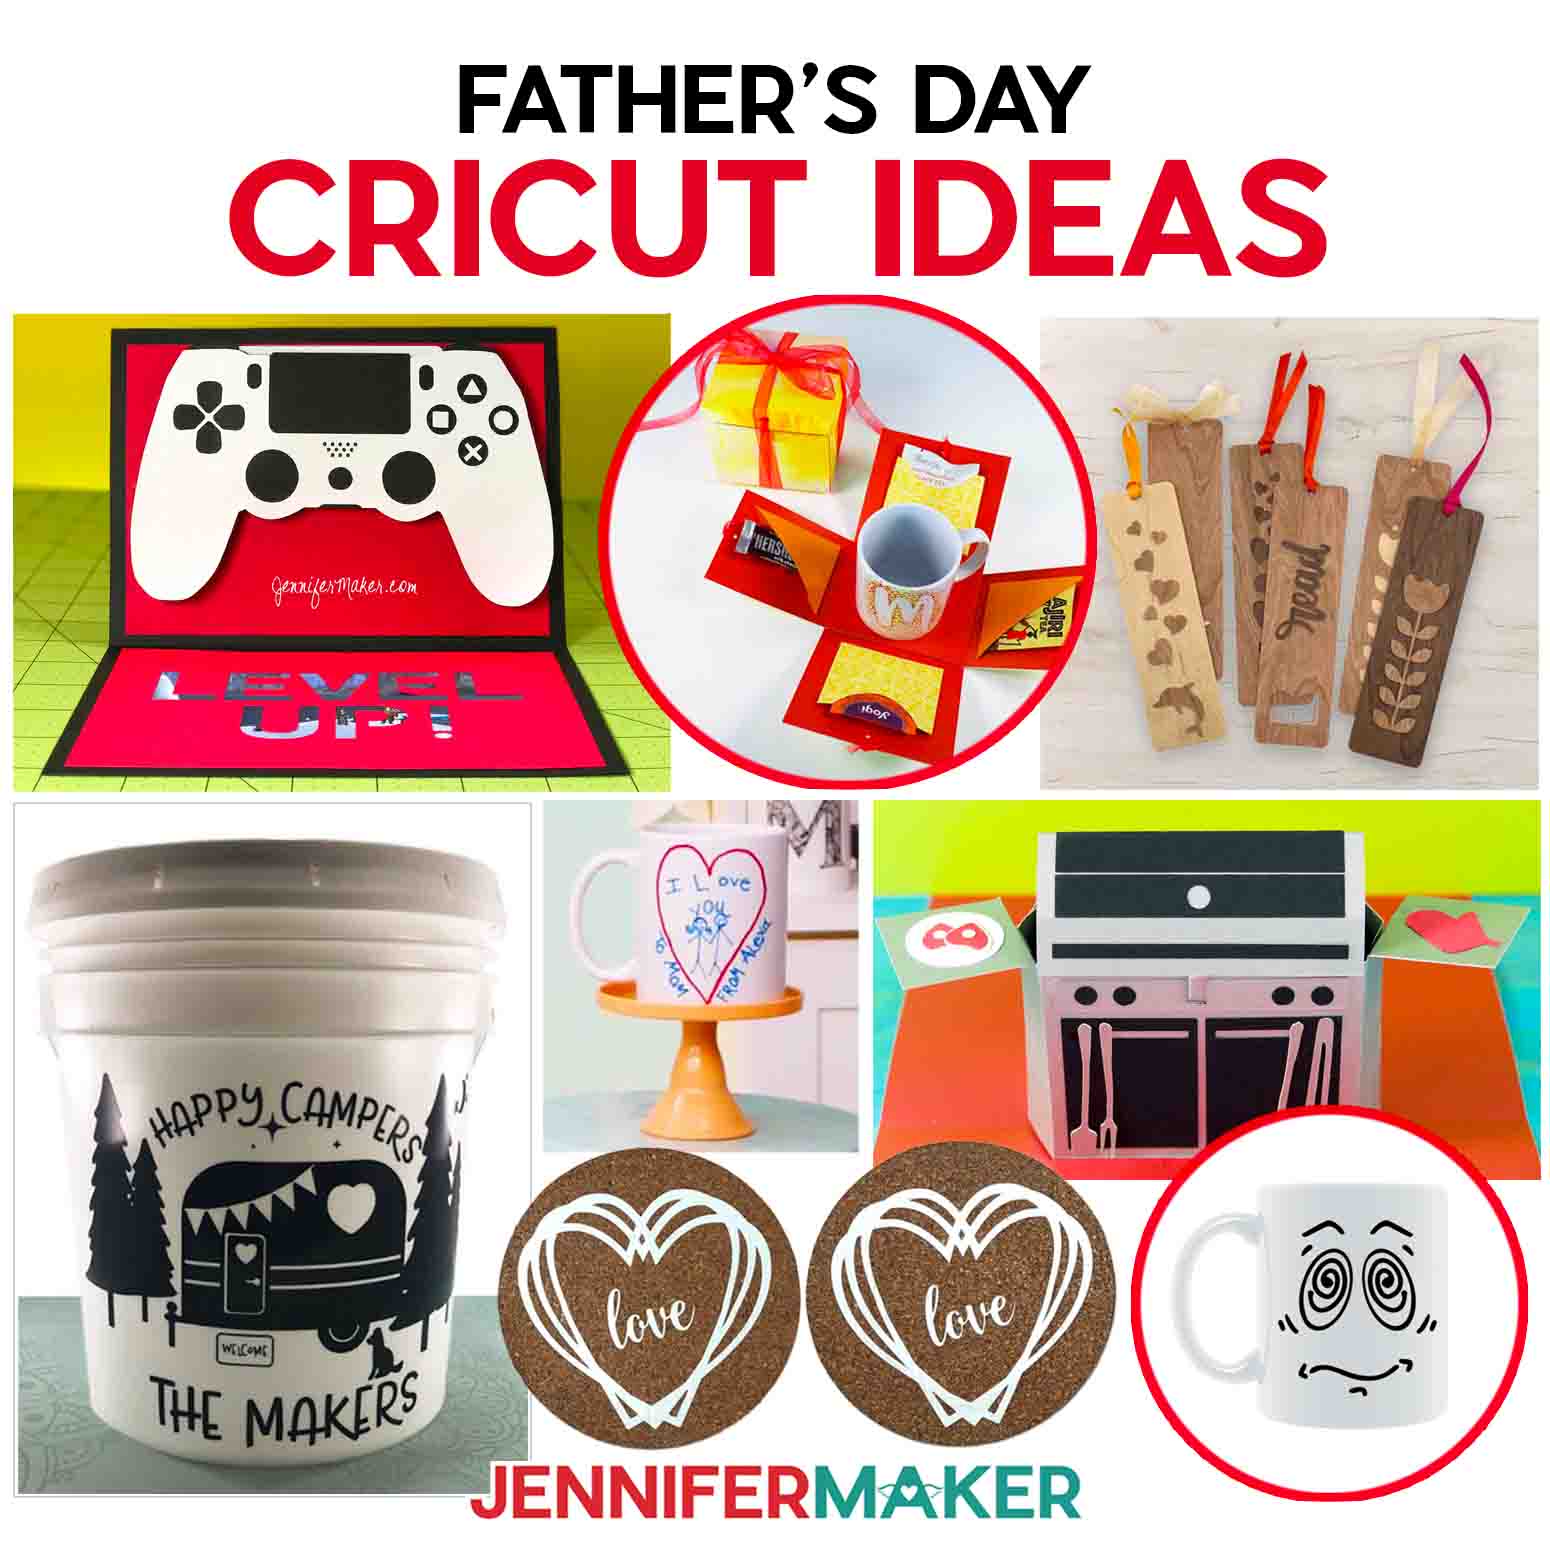 30+ Easy Father’s Day Cricut Ideas & Gifts For Dad